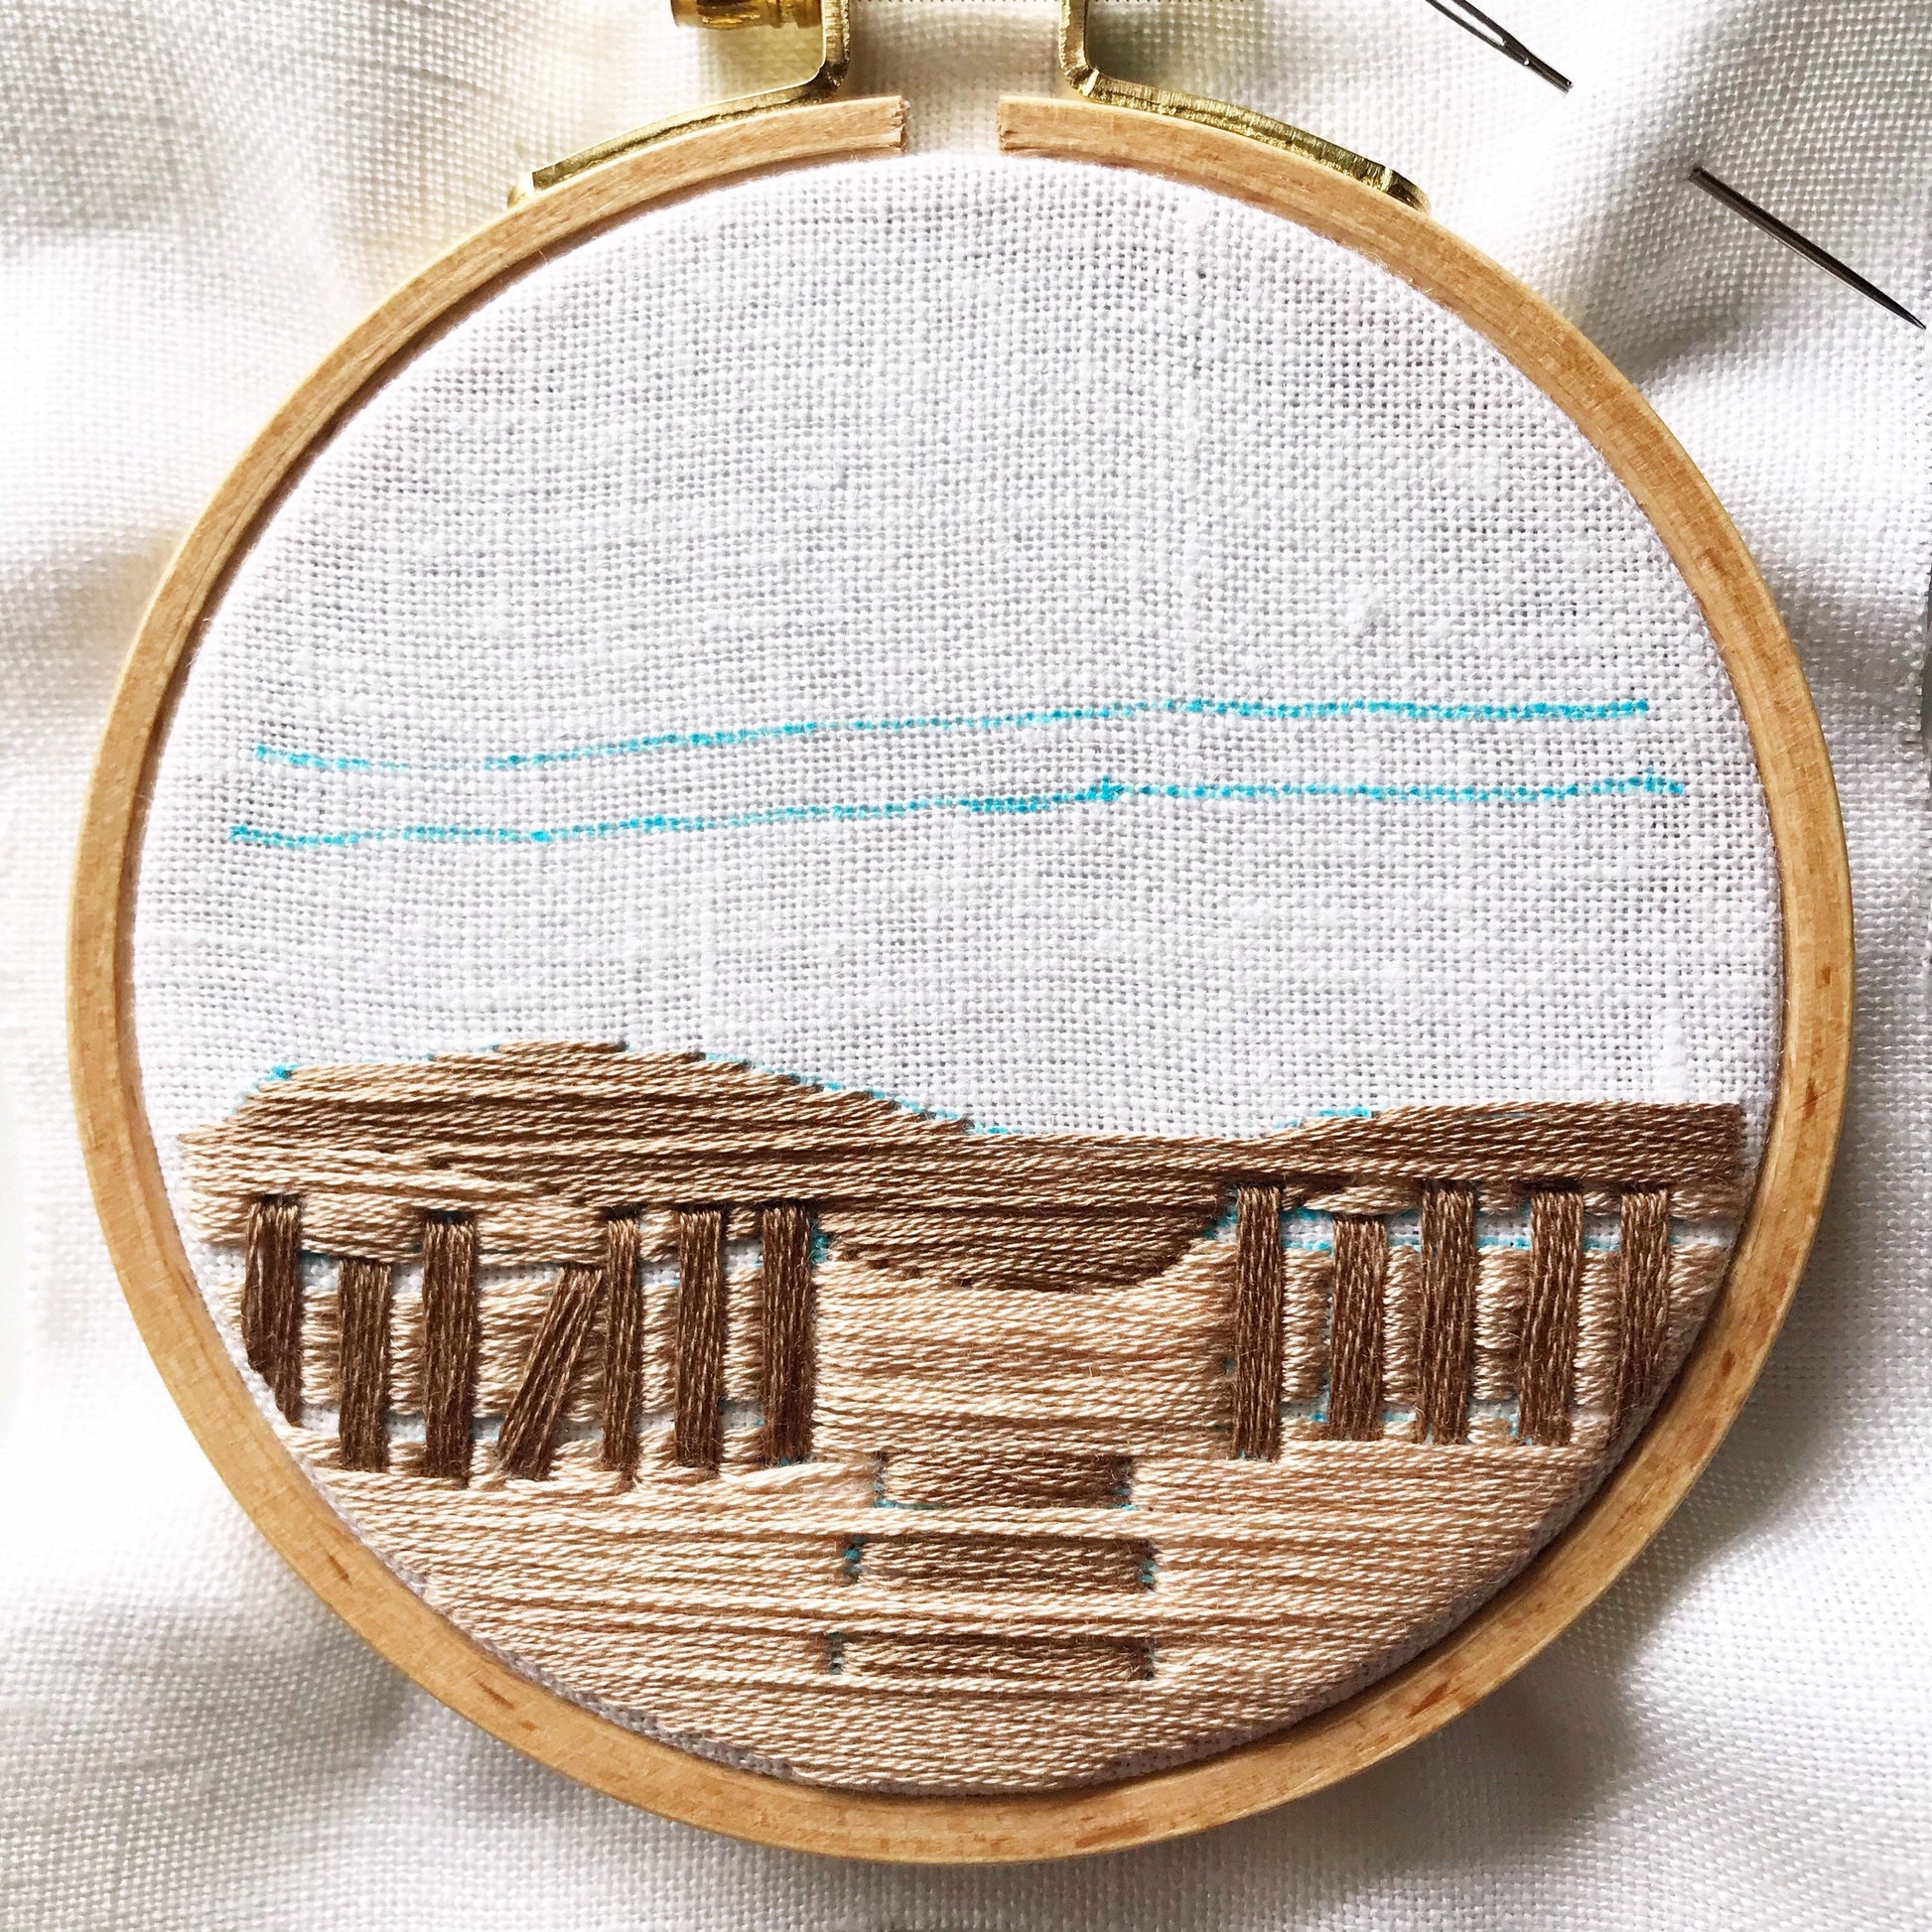 Day at the Beach: Intermediate Embroidery Kit – Rosanna Diggs Embroidery